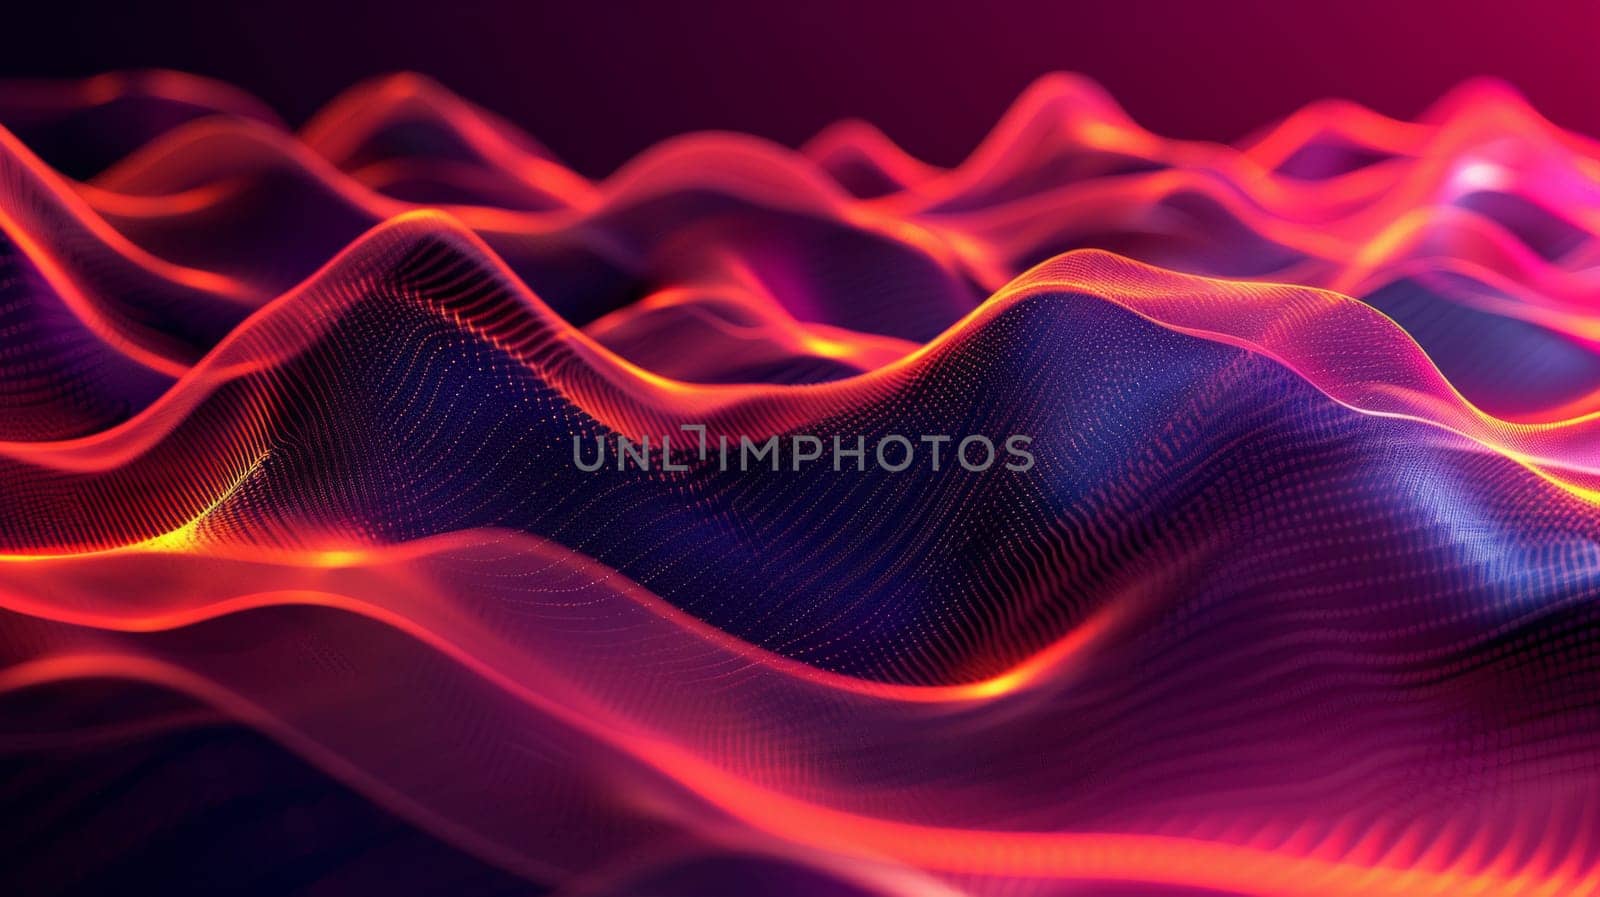 abstract tech wallpaper of red and blue waves with a purple background.